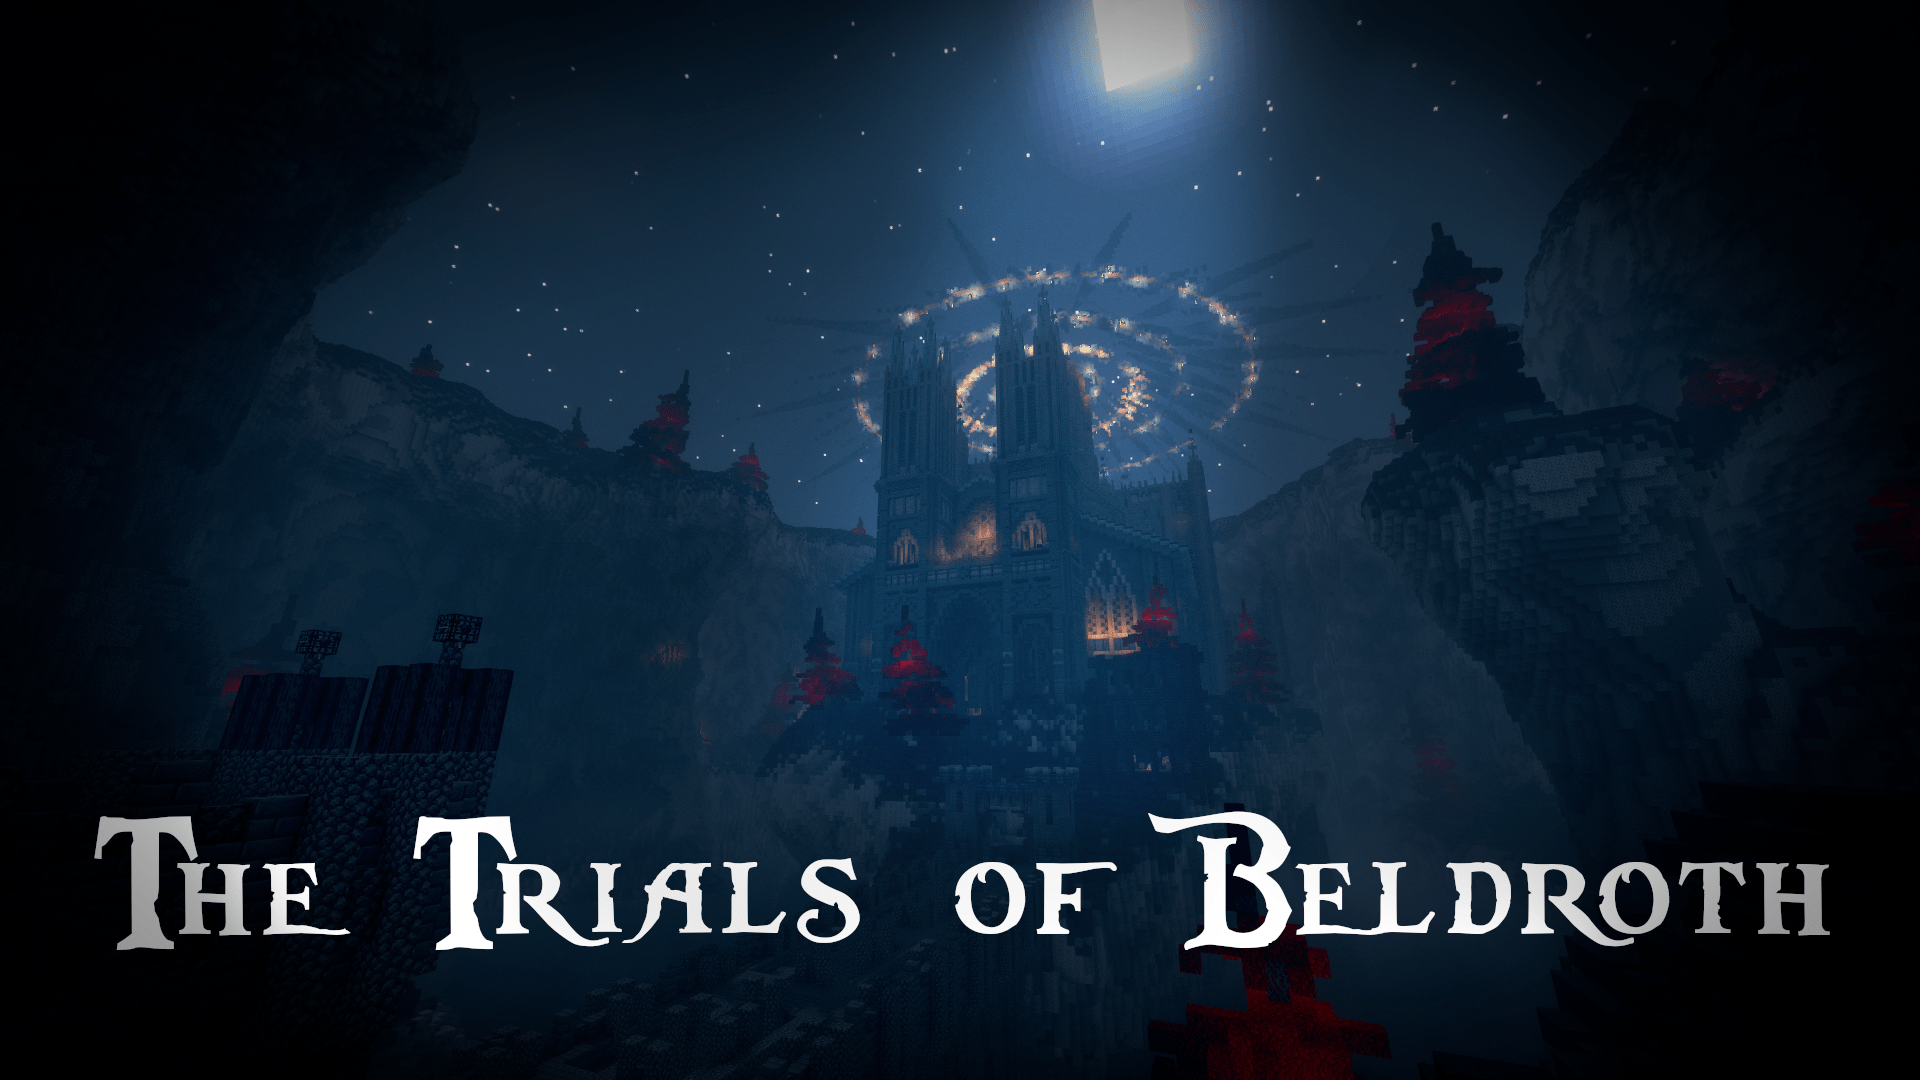 Download The Trials of Beldroth for Minecraft 1.17.1